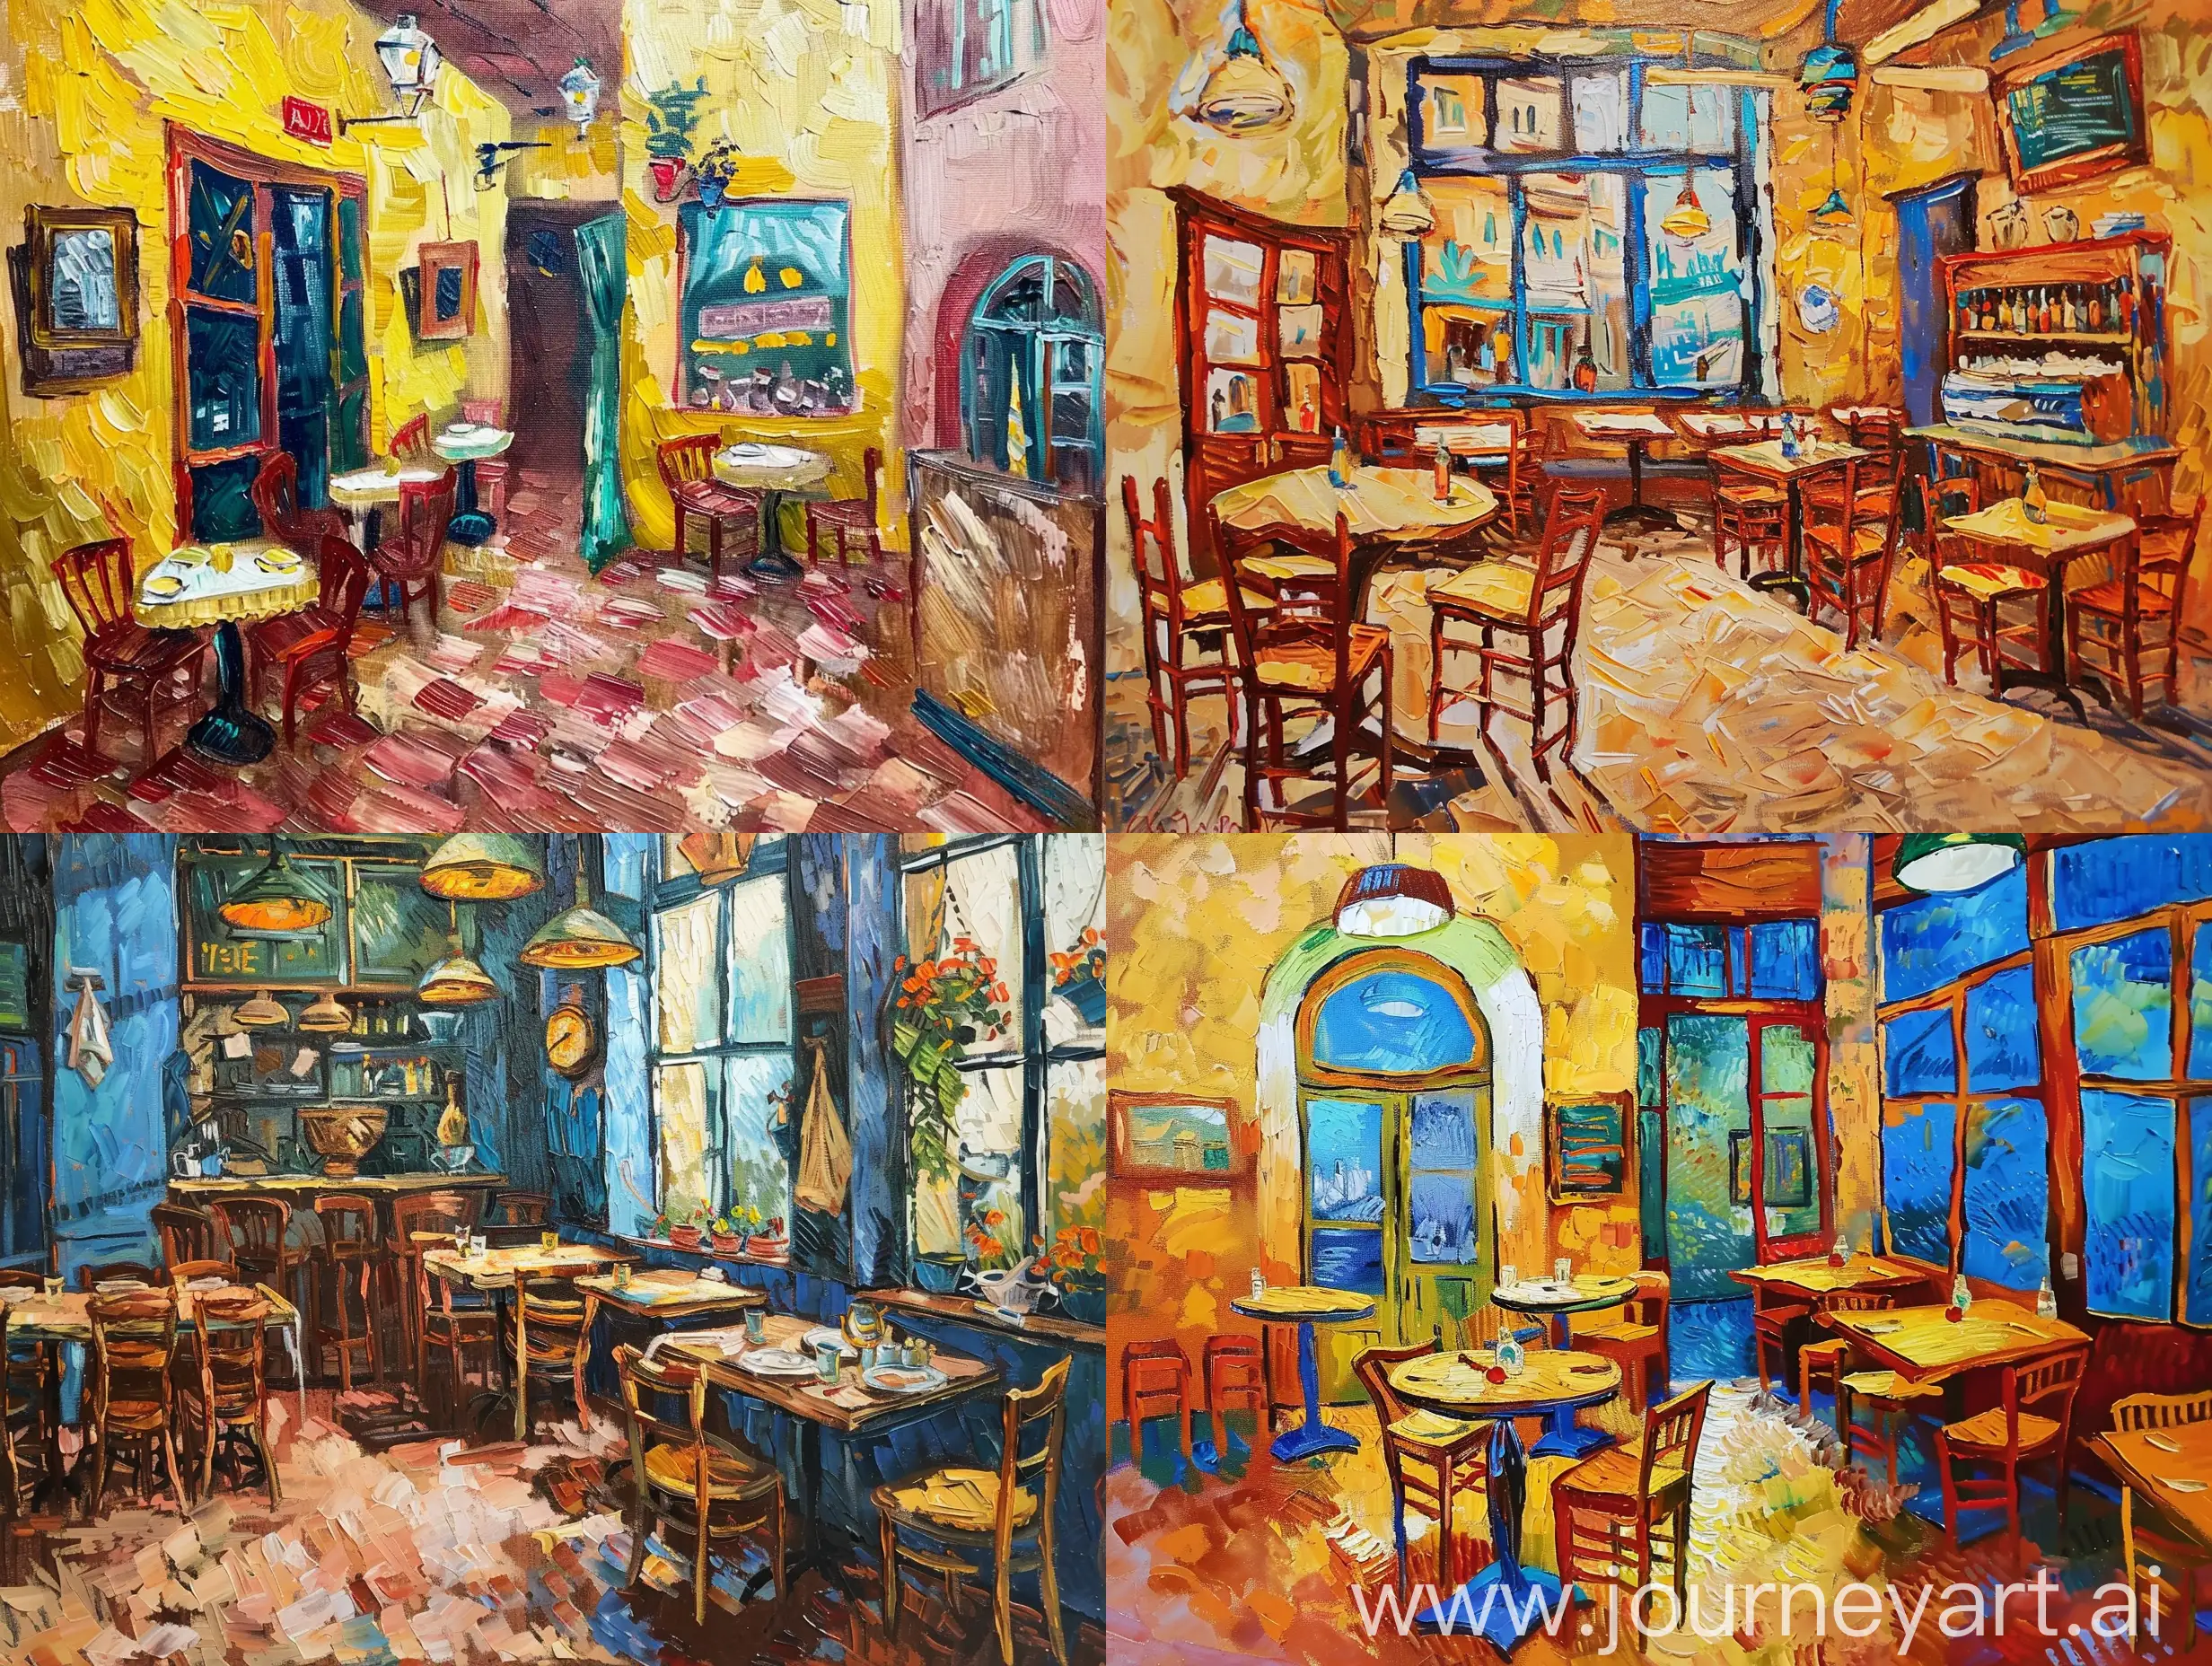 Vibrant-Oil-Painting-of-a-Restaurant-by-Van-Gogh